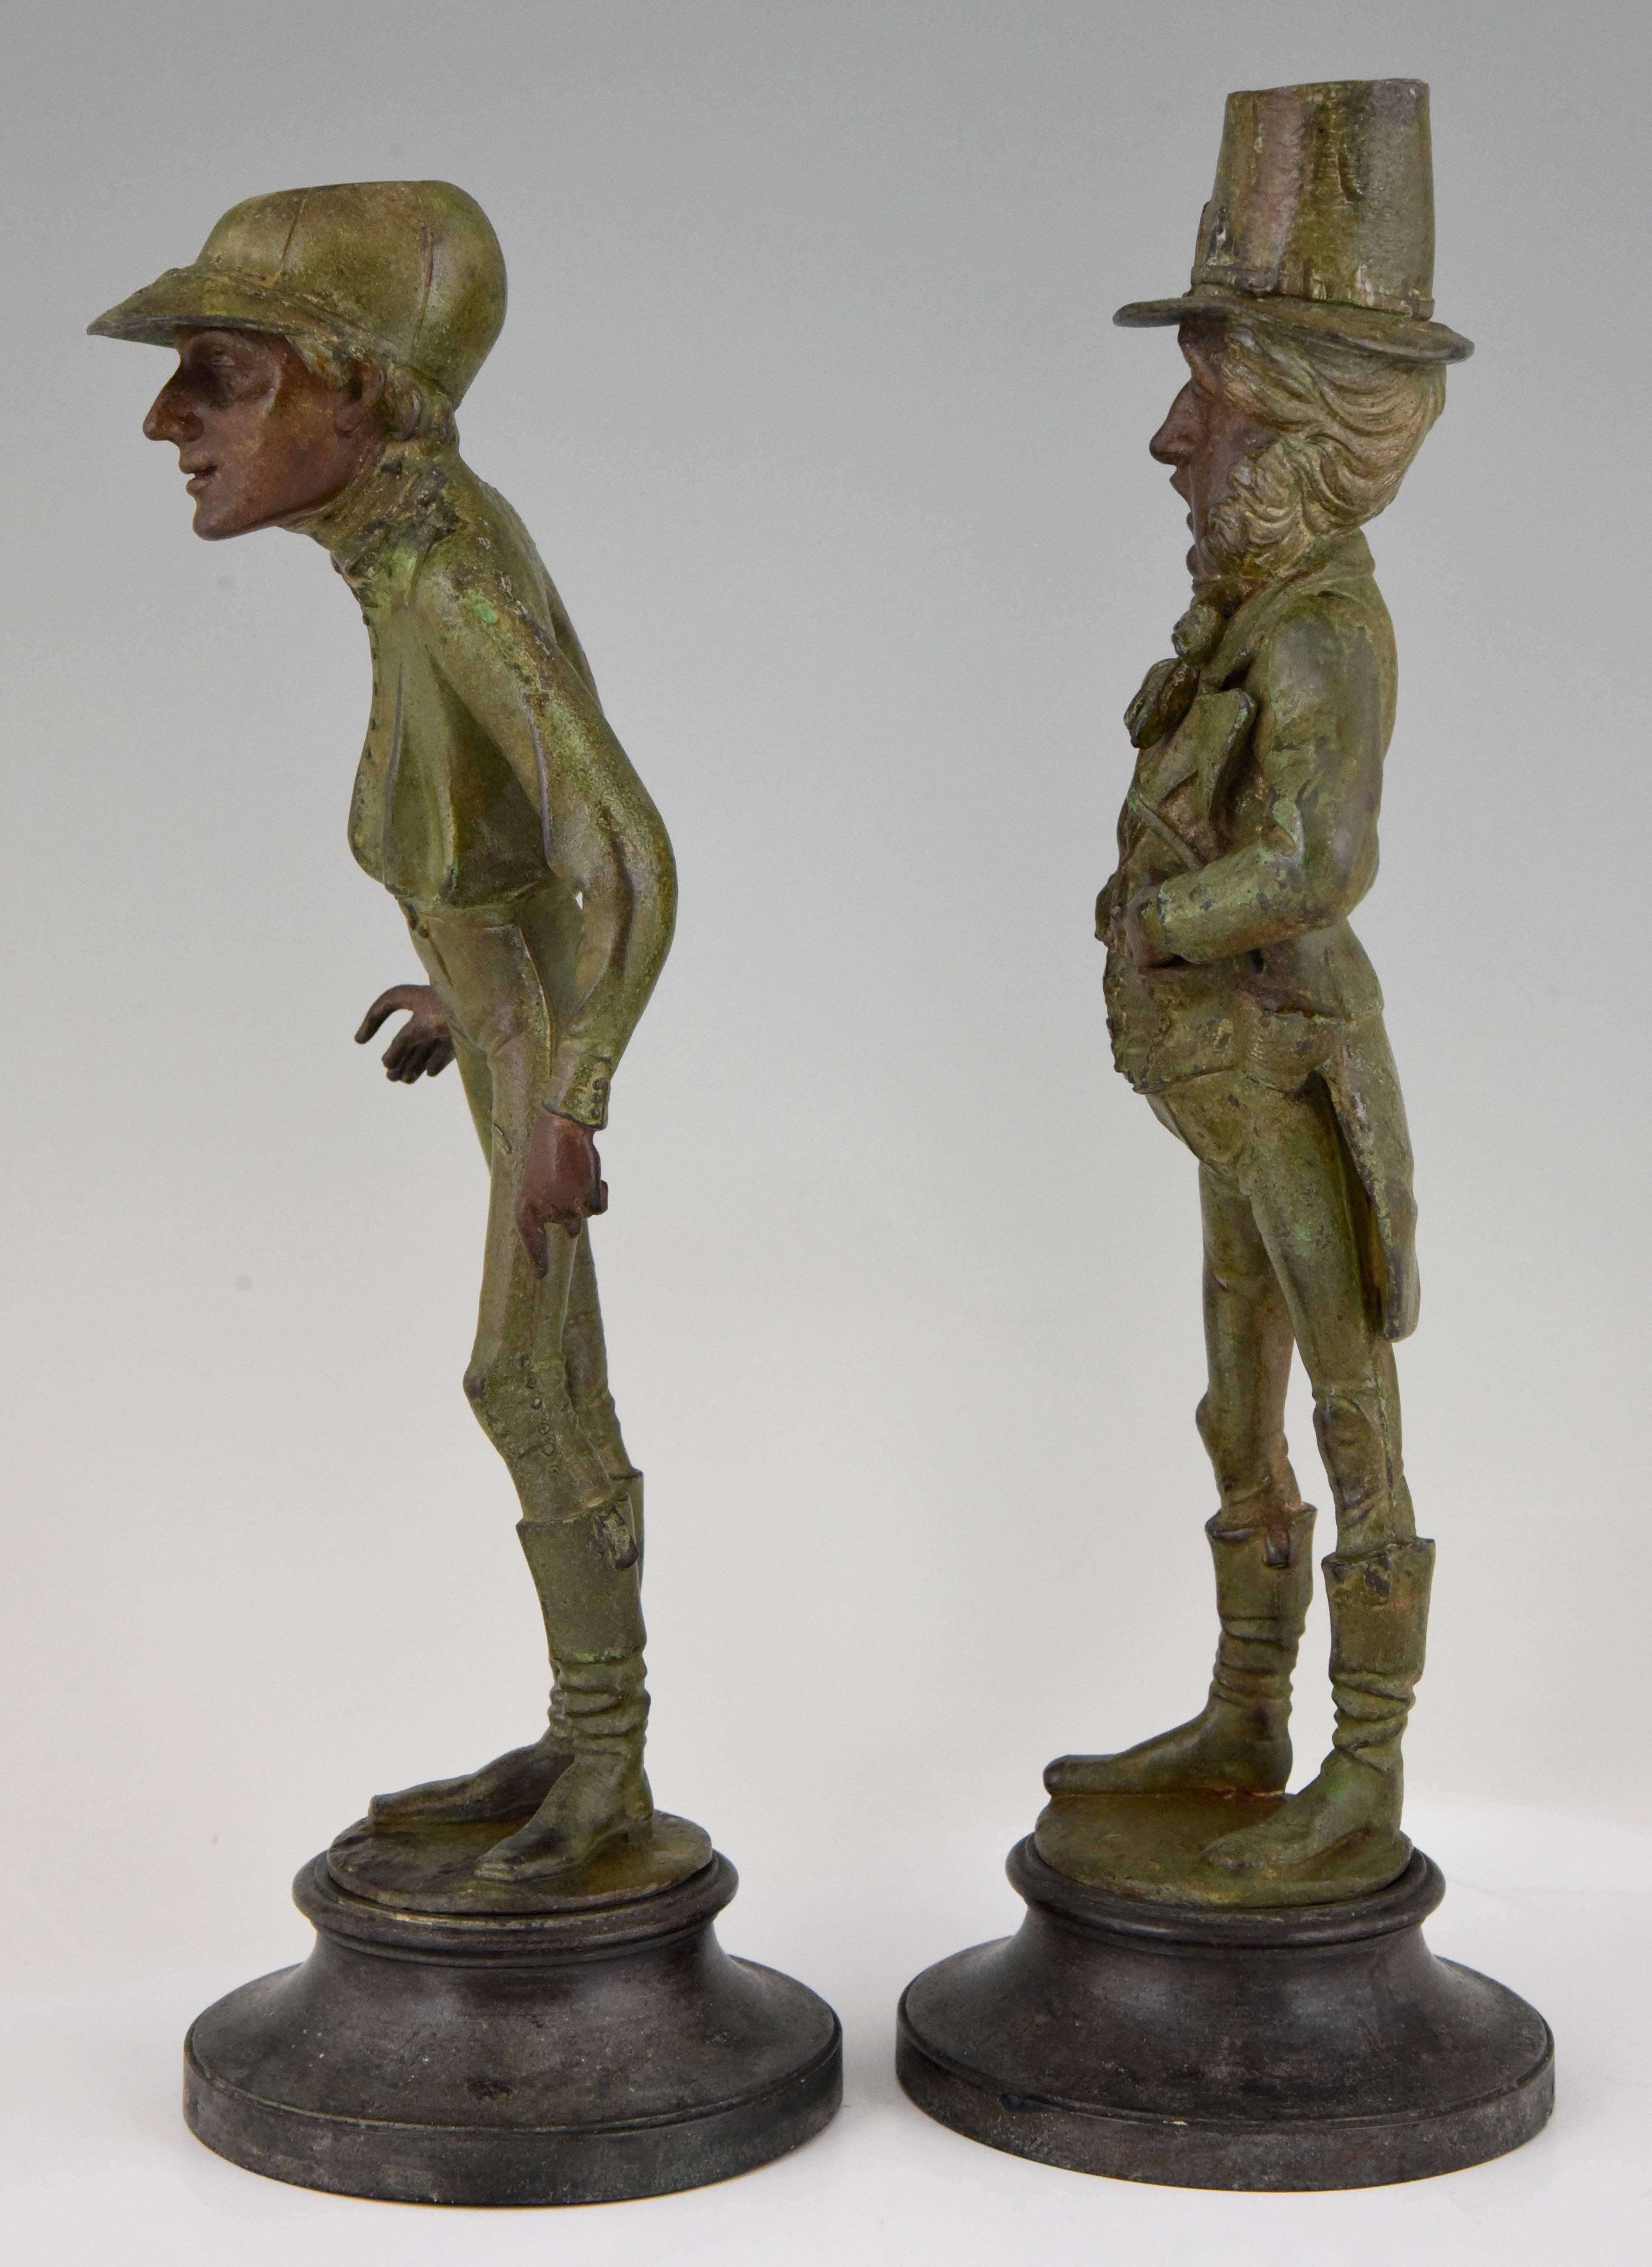 A pair of patinated metal figural candlesticks jockey and gentleman by Emila Guillemin.
Figures based on Vanity Fair print caricatures titled “The Favorite Jockey” and the “Statesman” after the cartoonist spy. 

Artist/ Maker: Emile